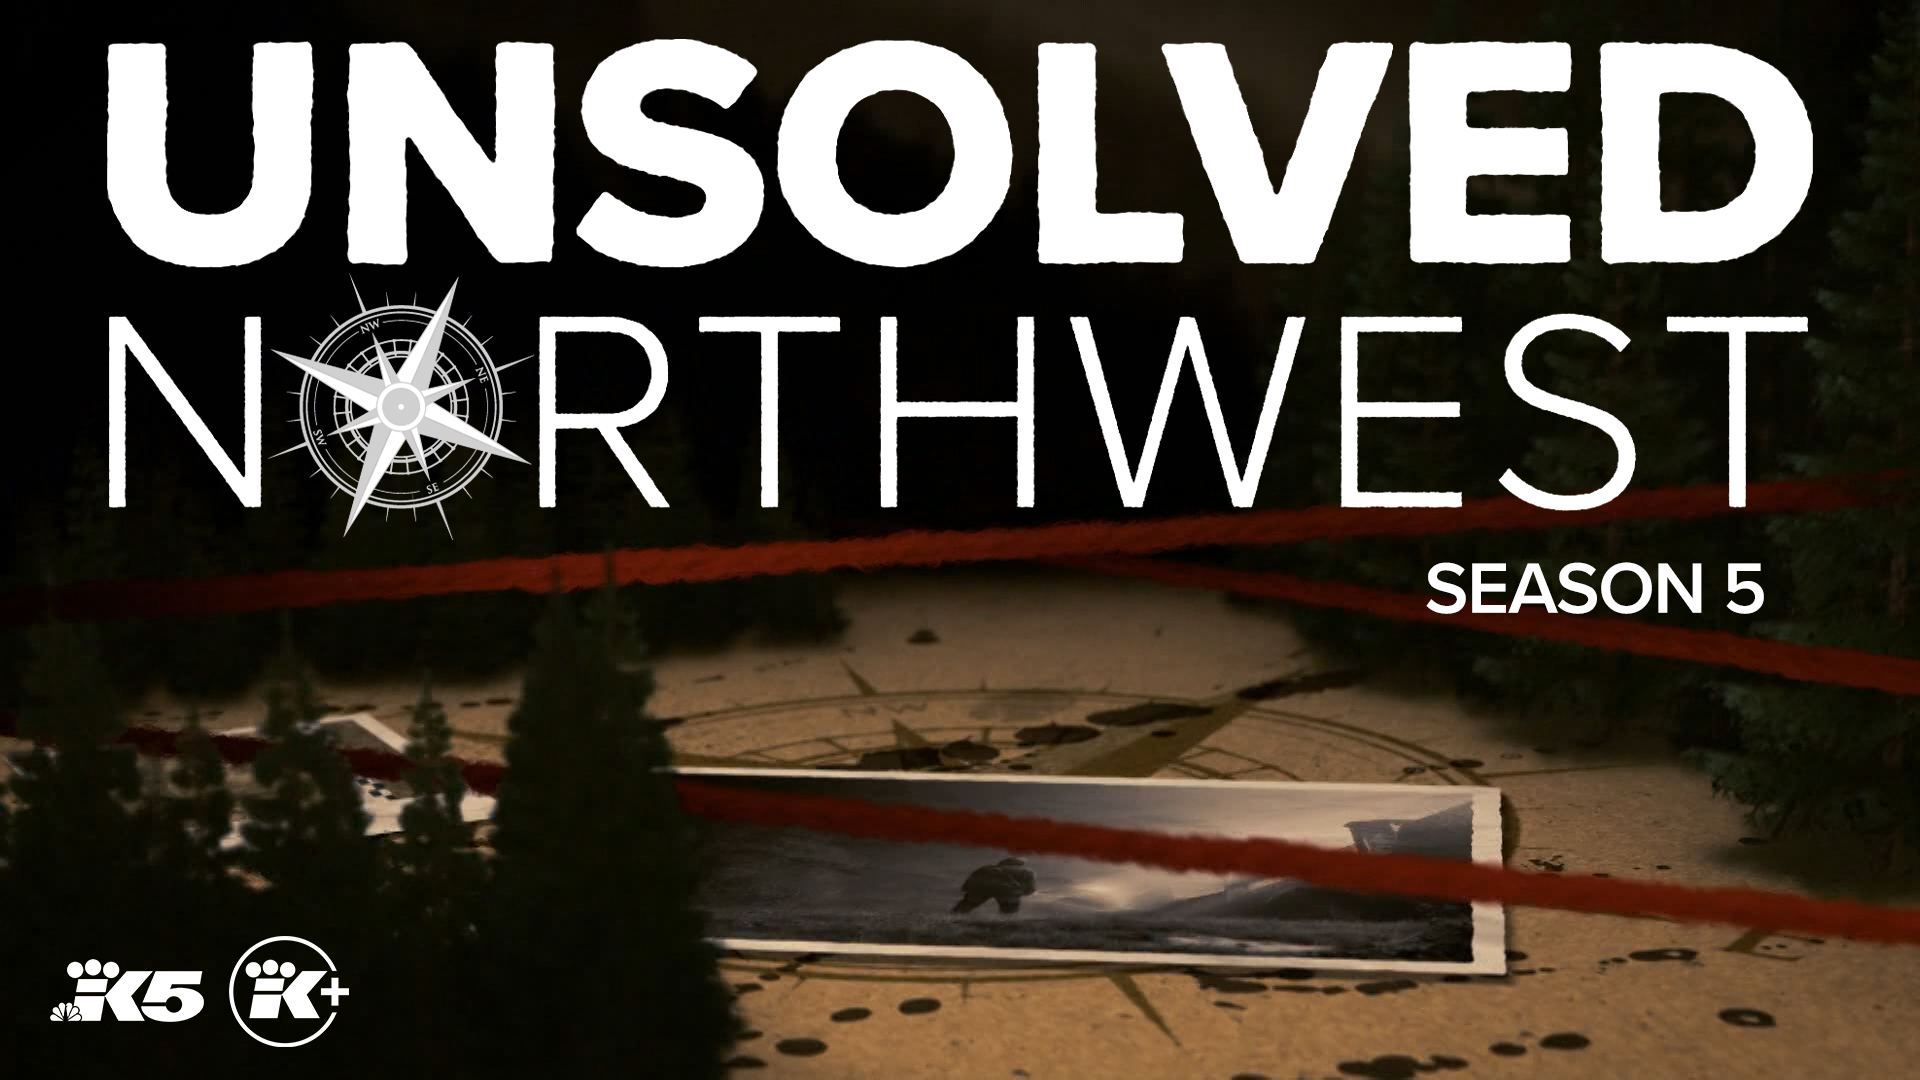 Four new unsolved crime stories from around the pacific northwest